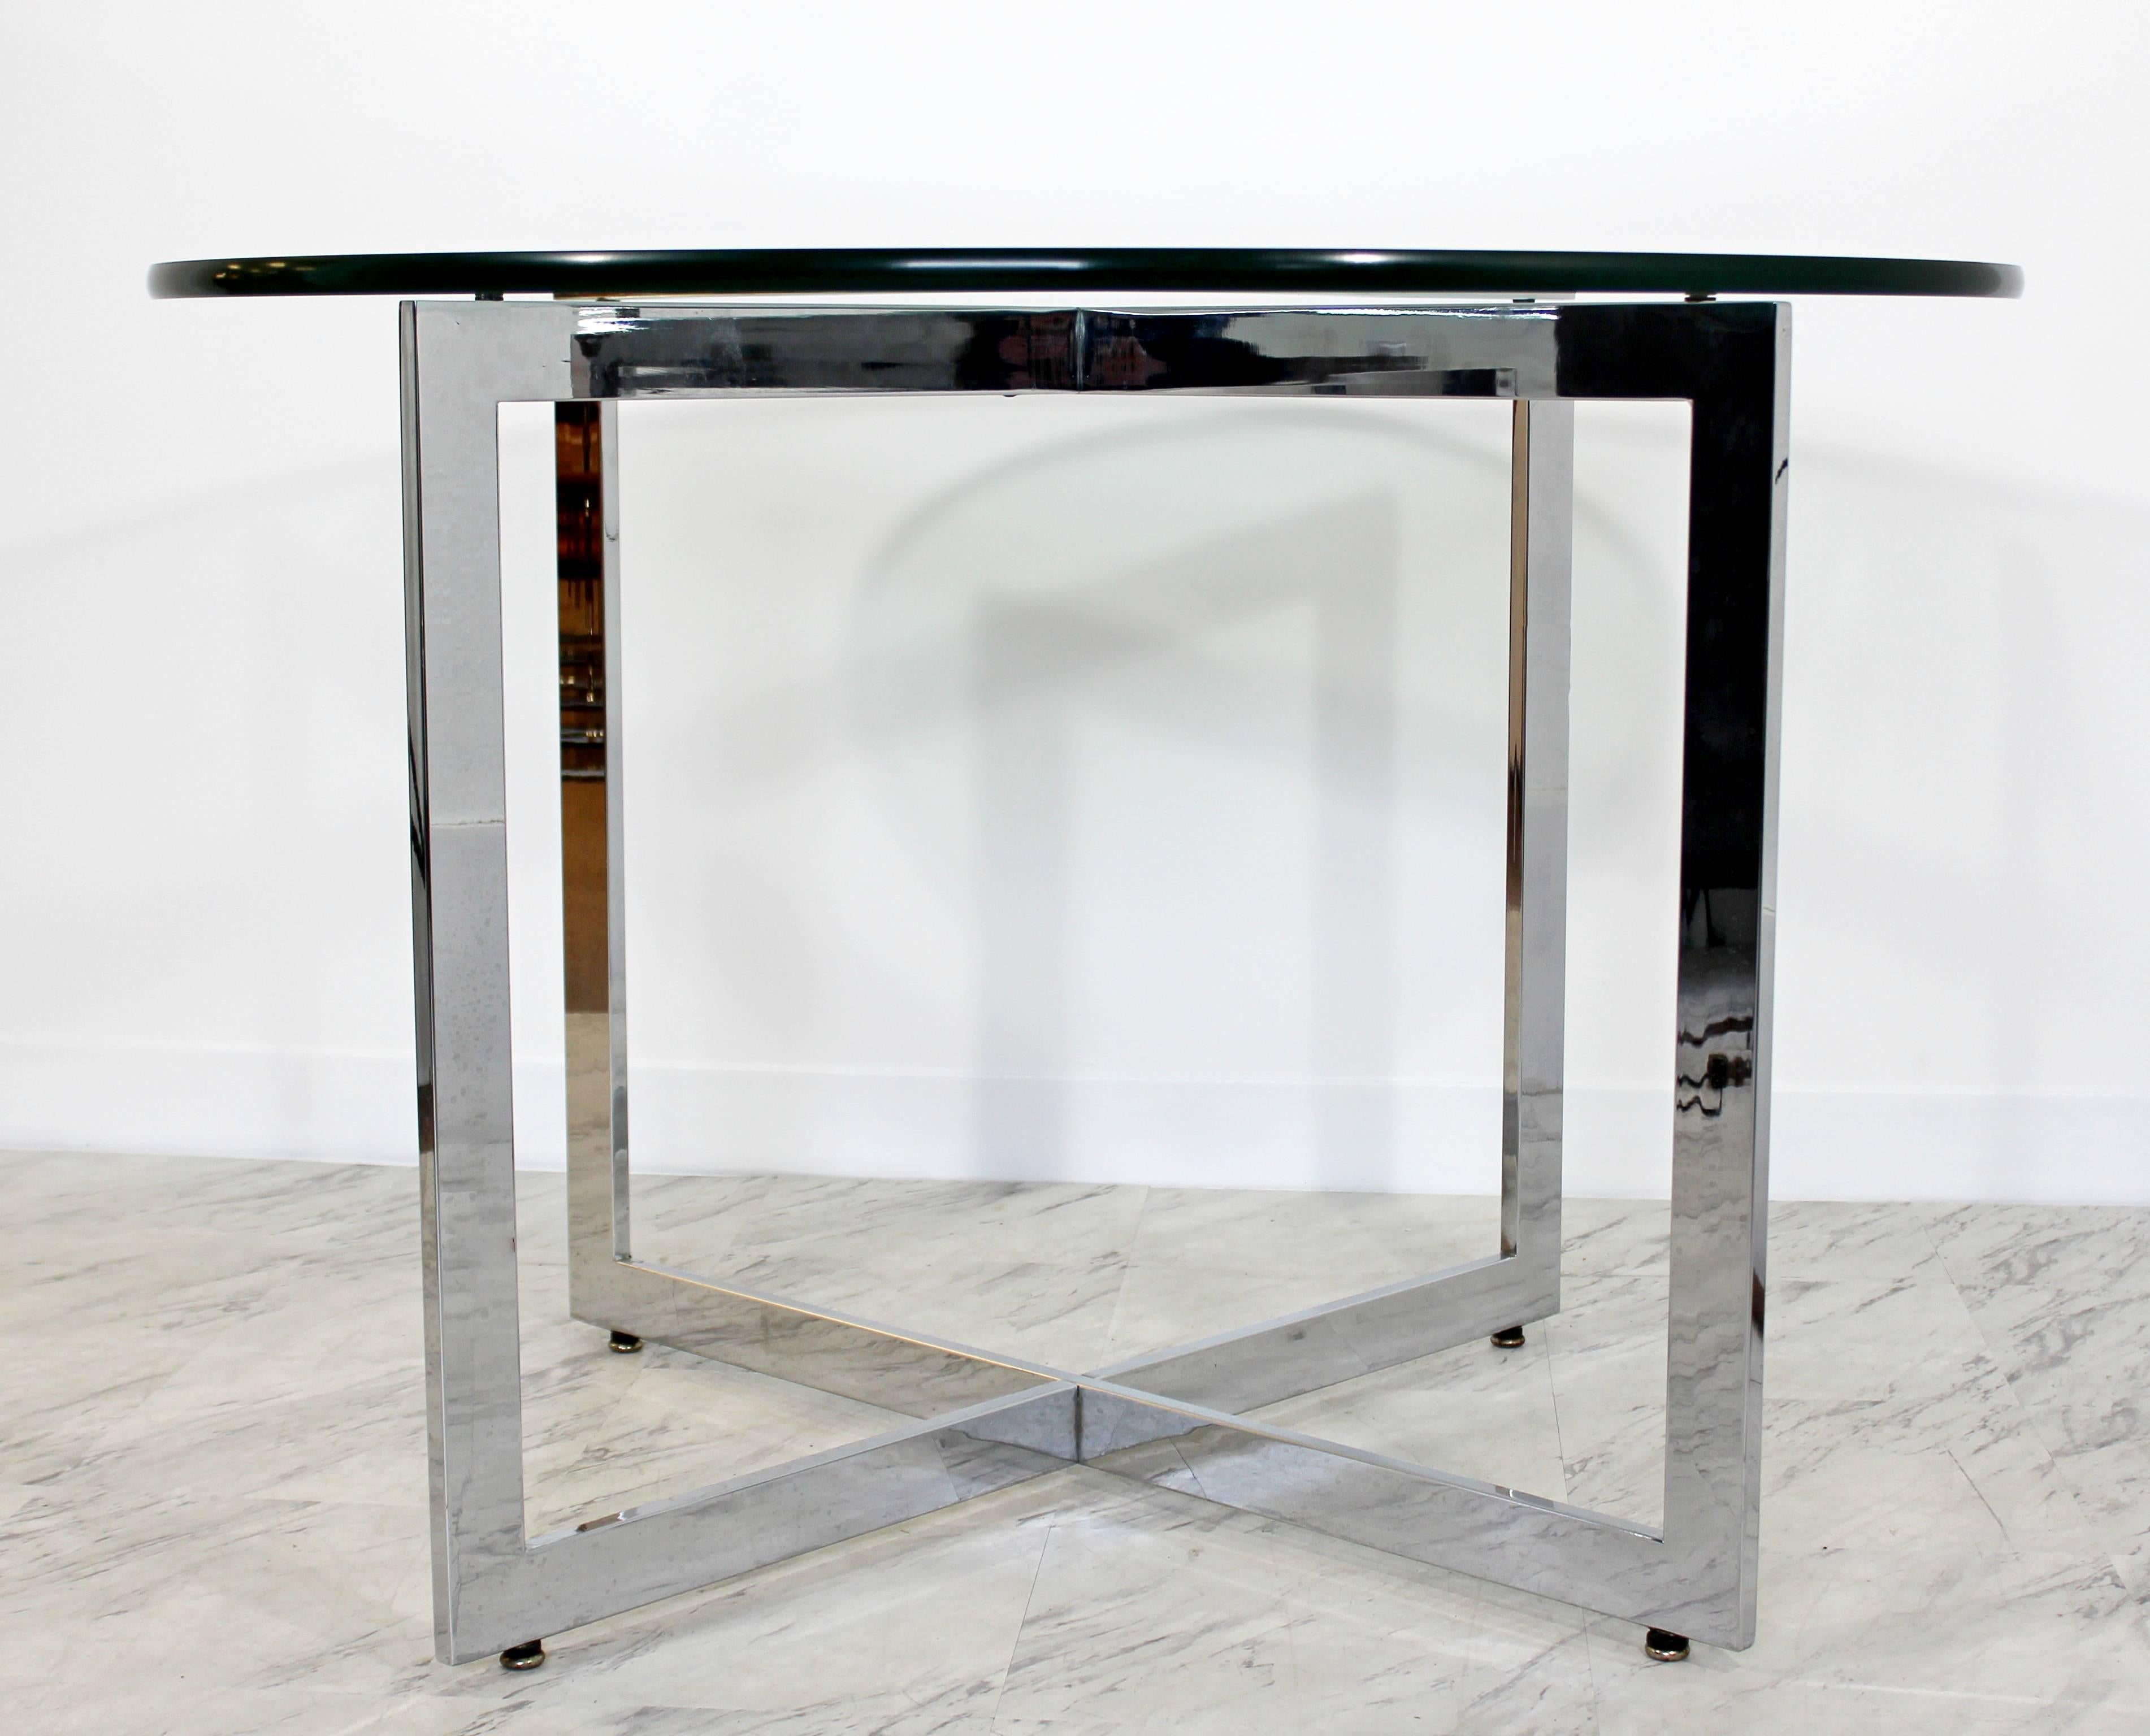 For your consideration is a fabulous dinette table, with a star-shaped chrome base and a circular glass top, by Leon Rosen by Pace, circa the 1970s. In excellent condition. The dimensions are 42